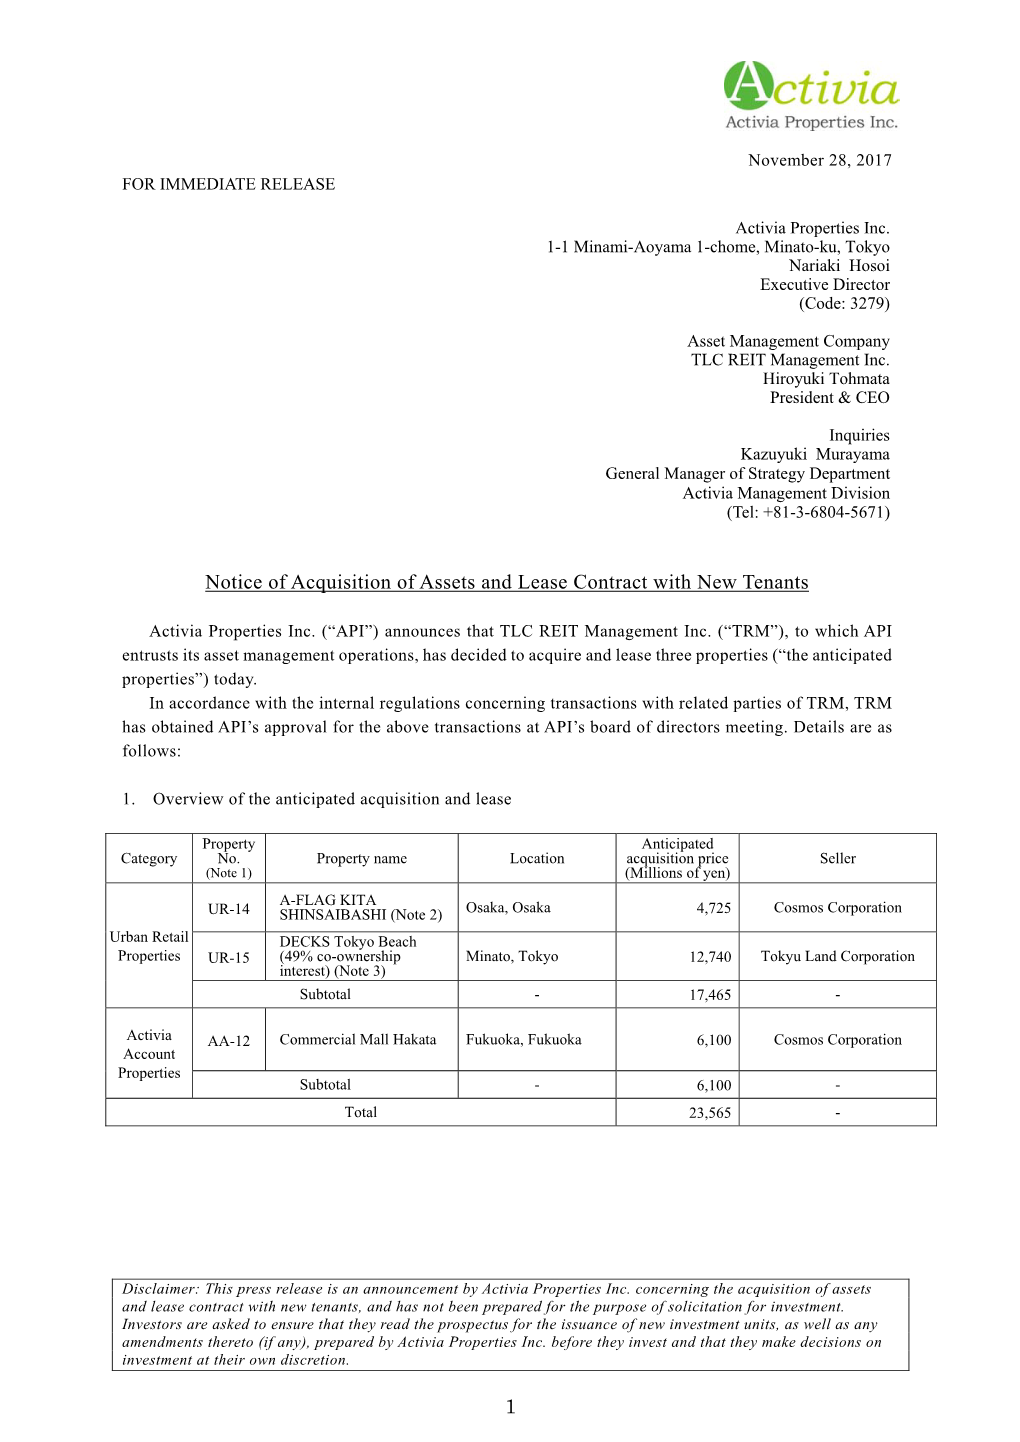 Notice of Acquisition of Assets and Lease Contract with New Tenants